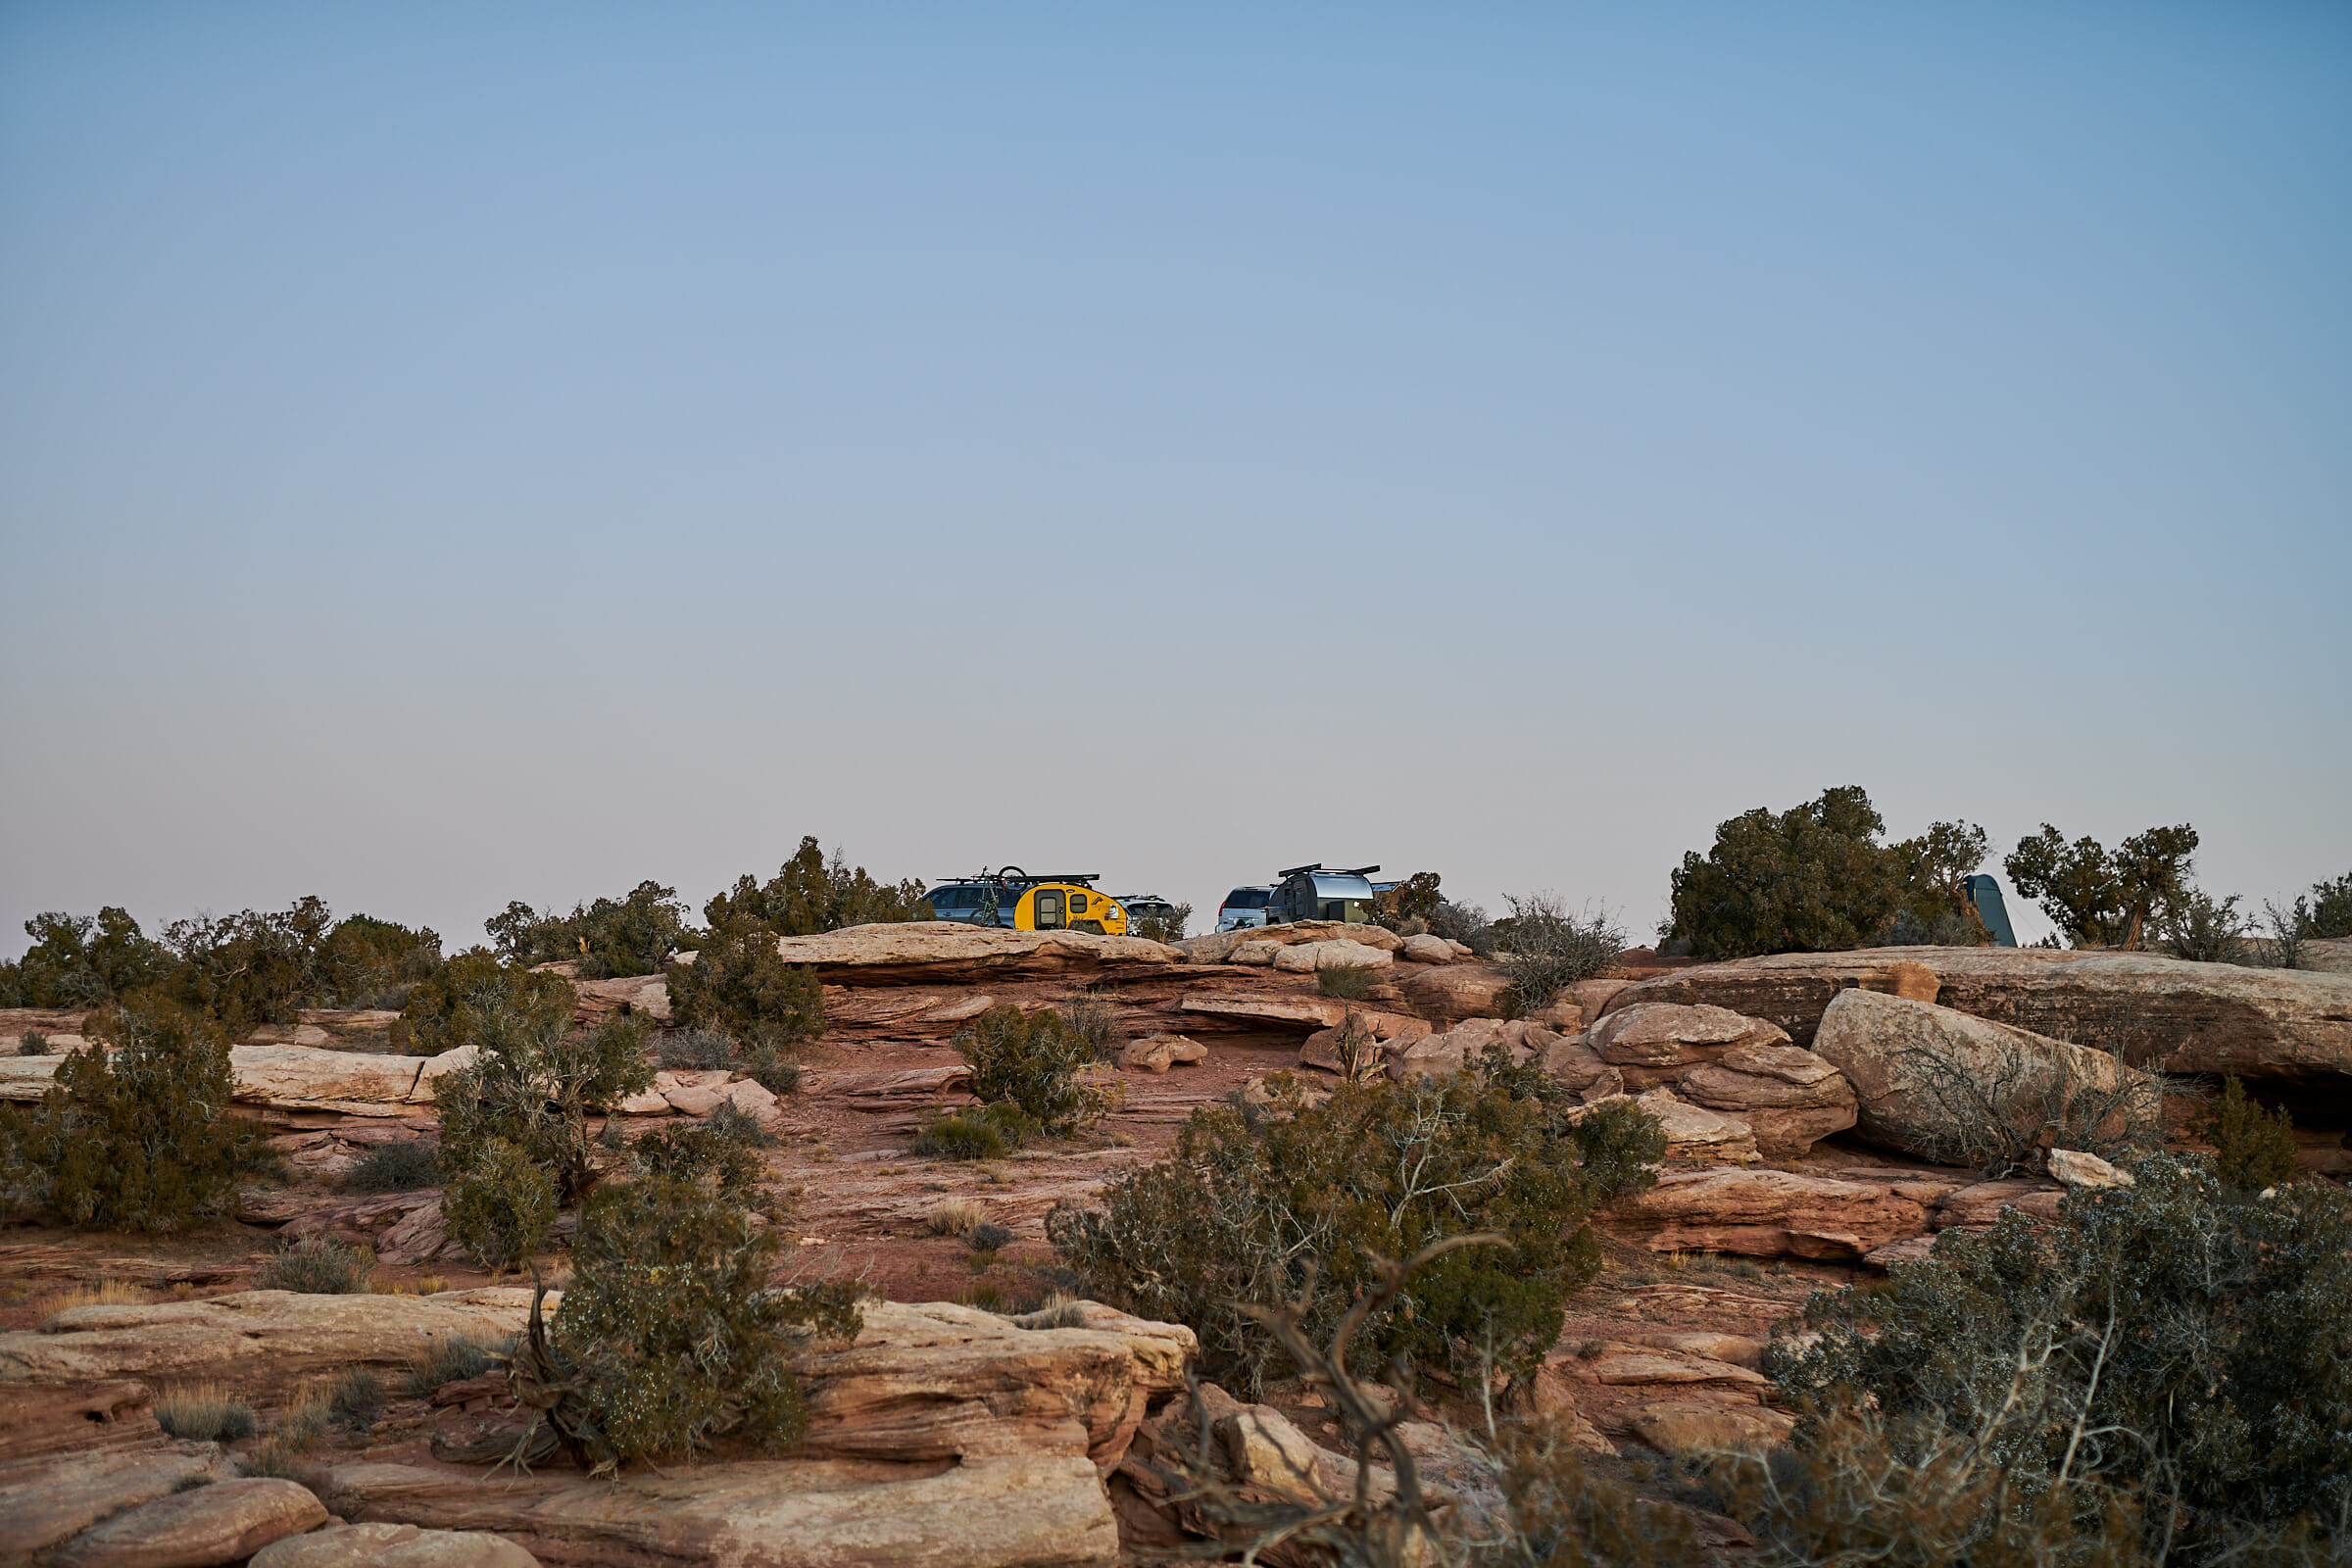 Using Teardrop Trailers For Camping In The Desert